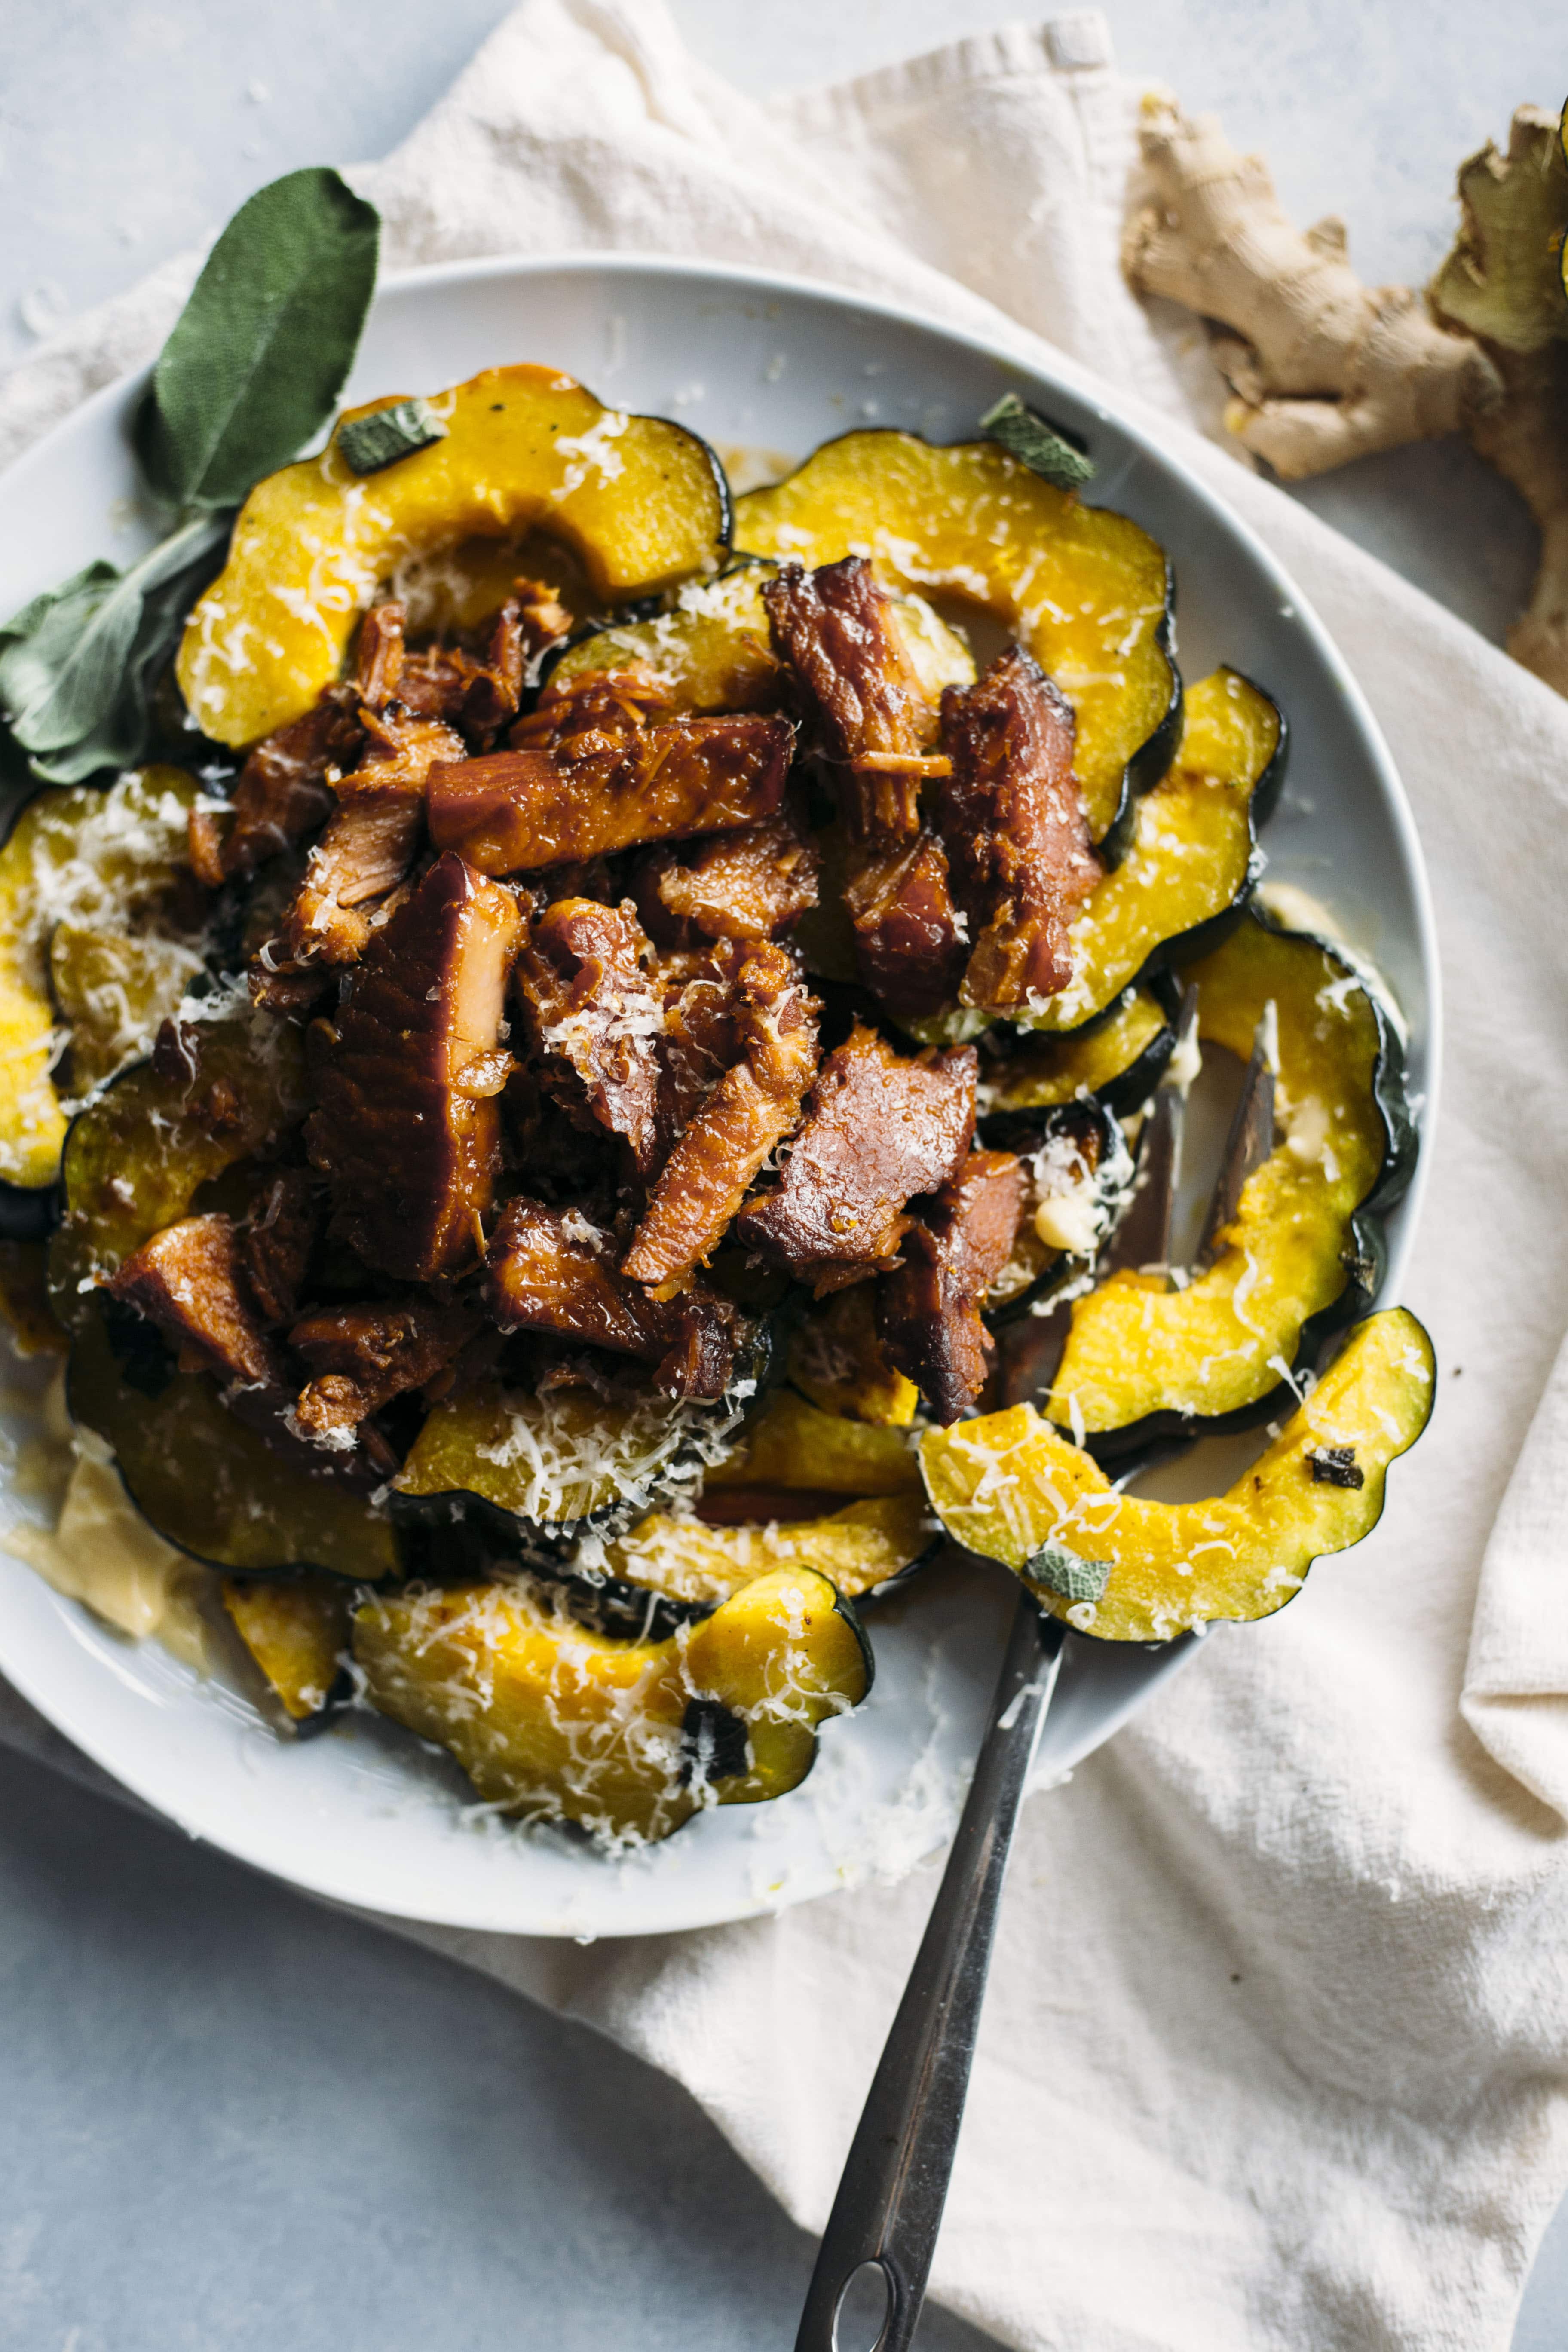 Roasted Acorn Squash | Acorn squash topped with honey ginger pork made in the slow cooker. A tasty way to enjoy squash! | thealmondeater.com